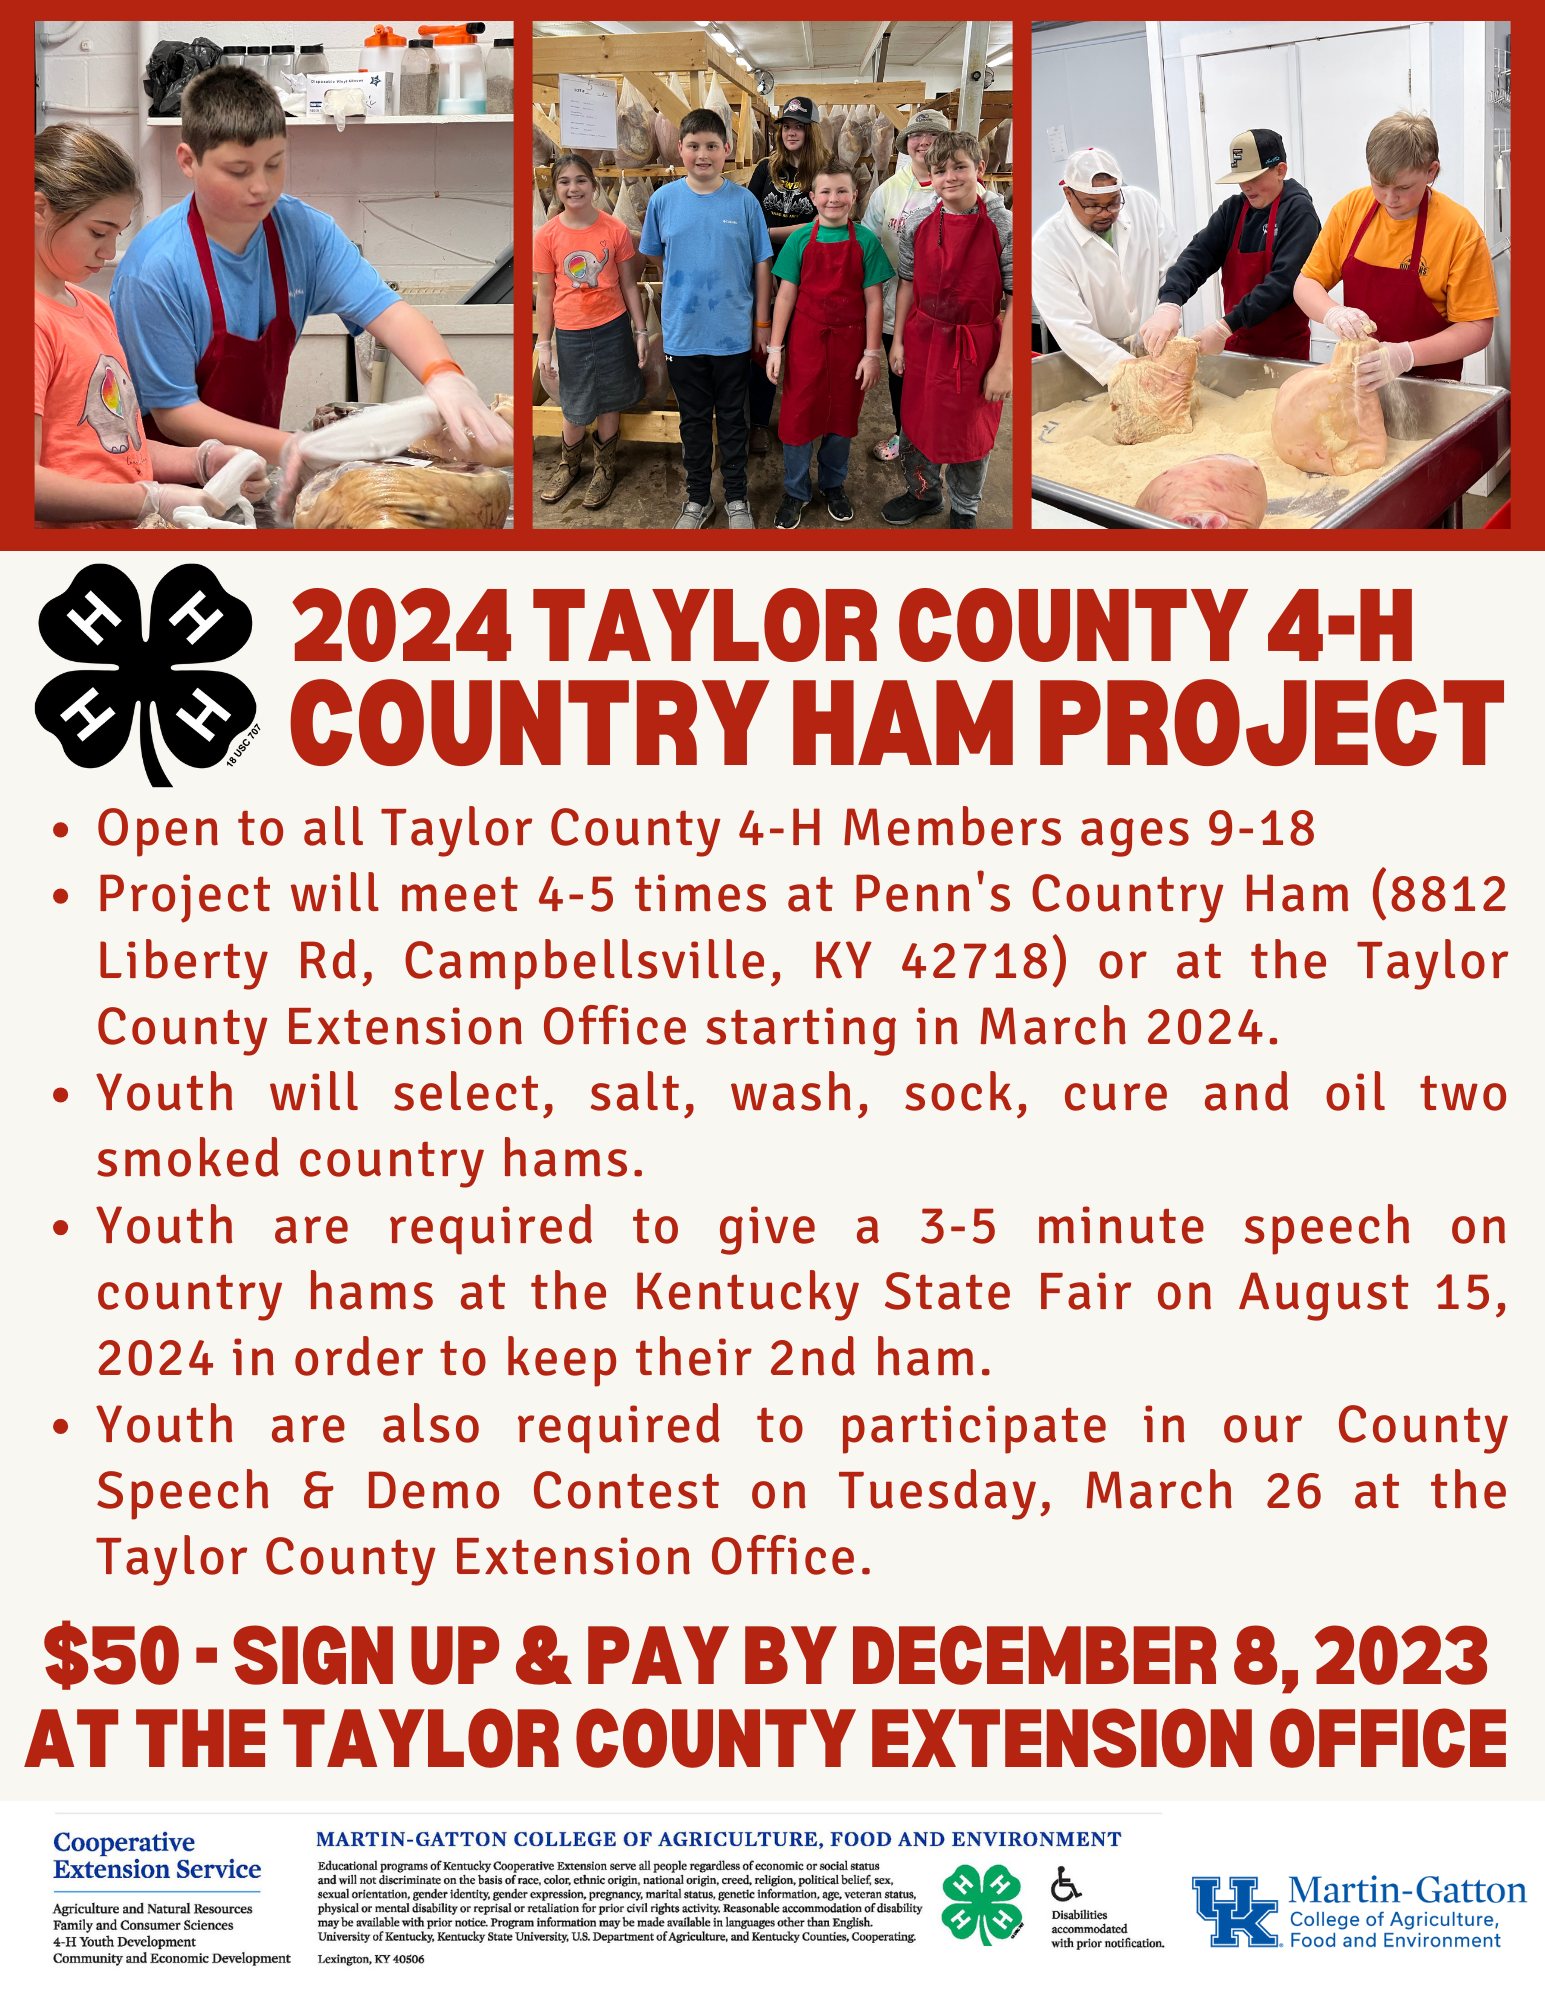 Country Ham Project